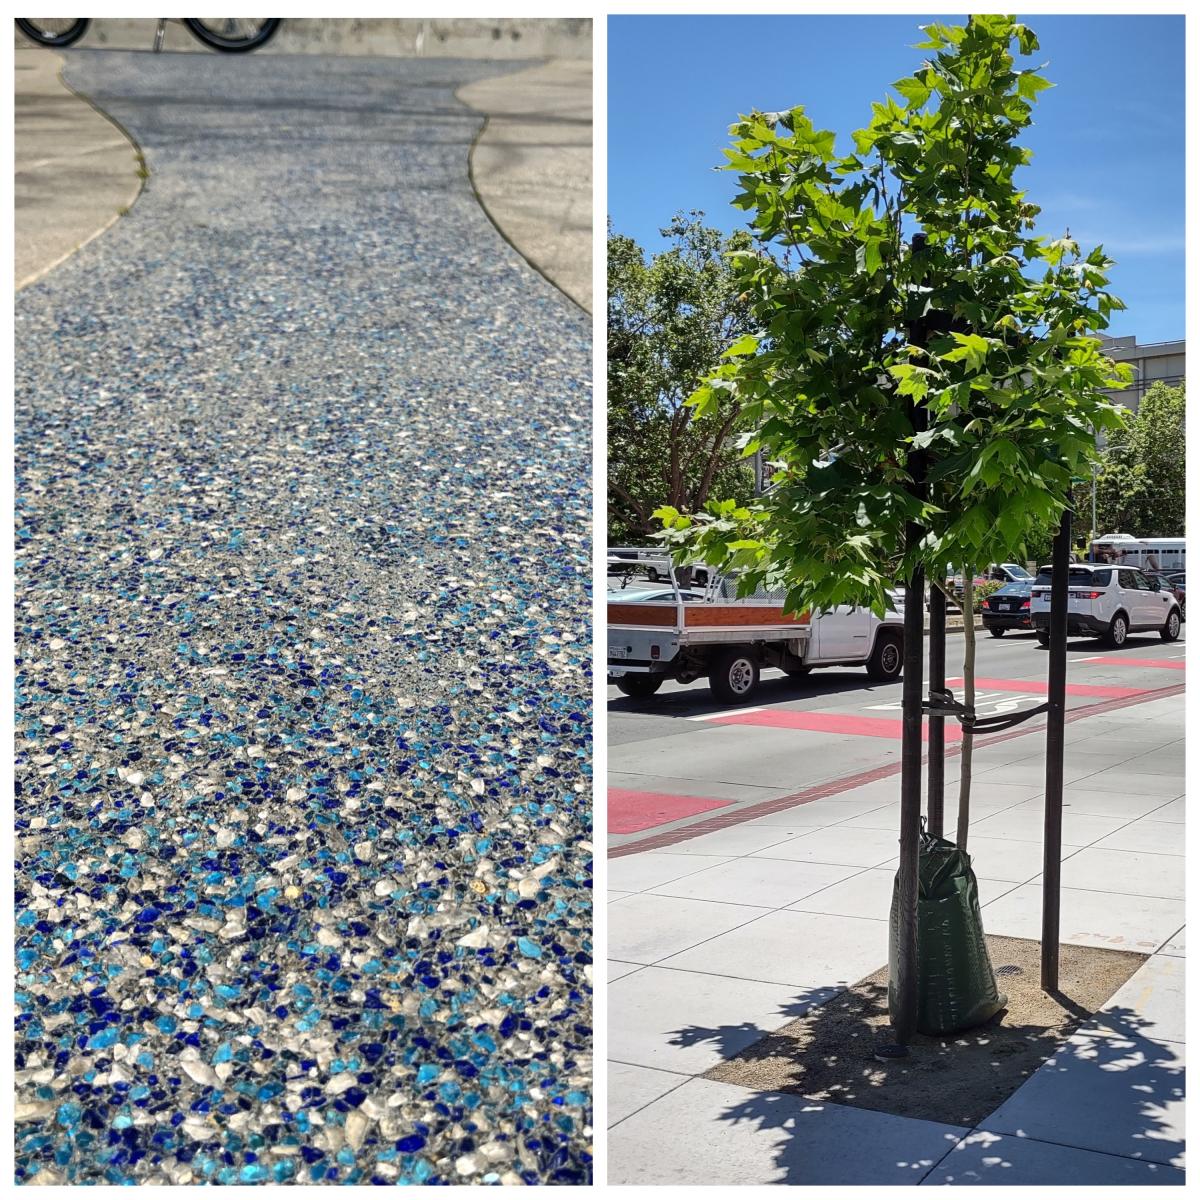 An example of a concrete glass aggregate sidewalk design and new trees on Geary Boulevard in the Western Addition.